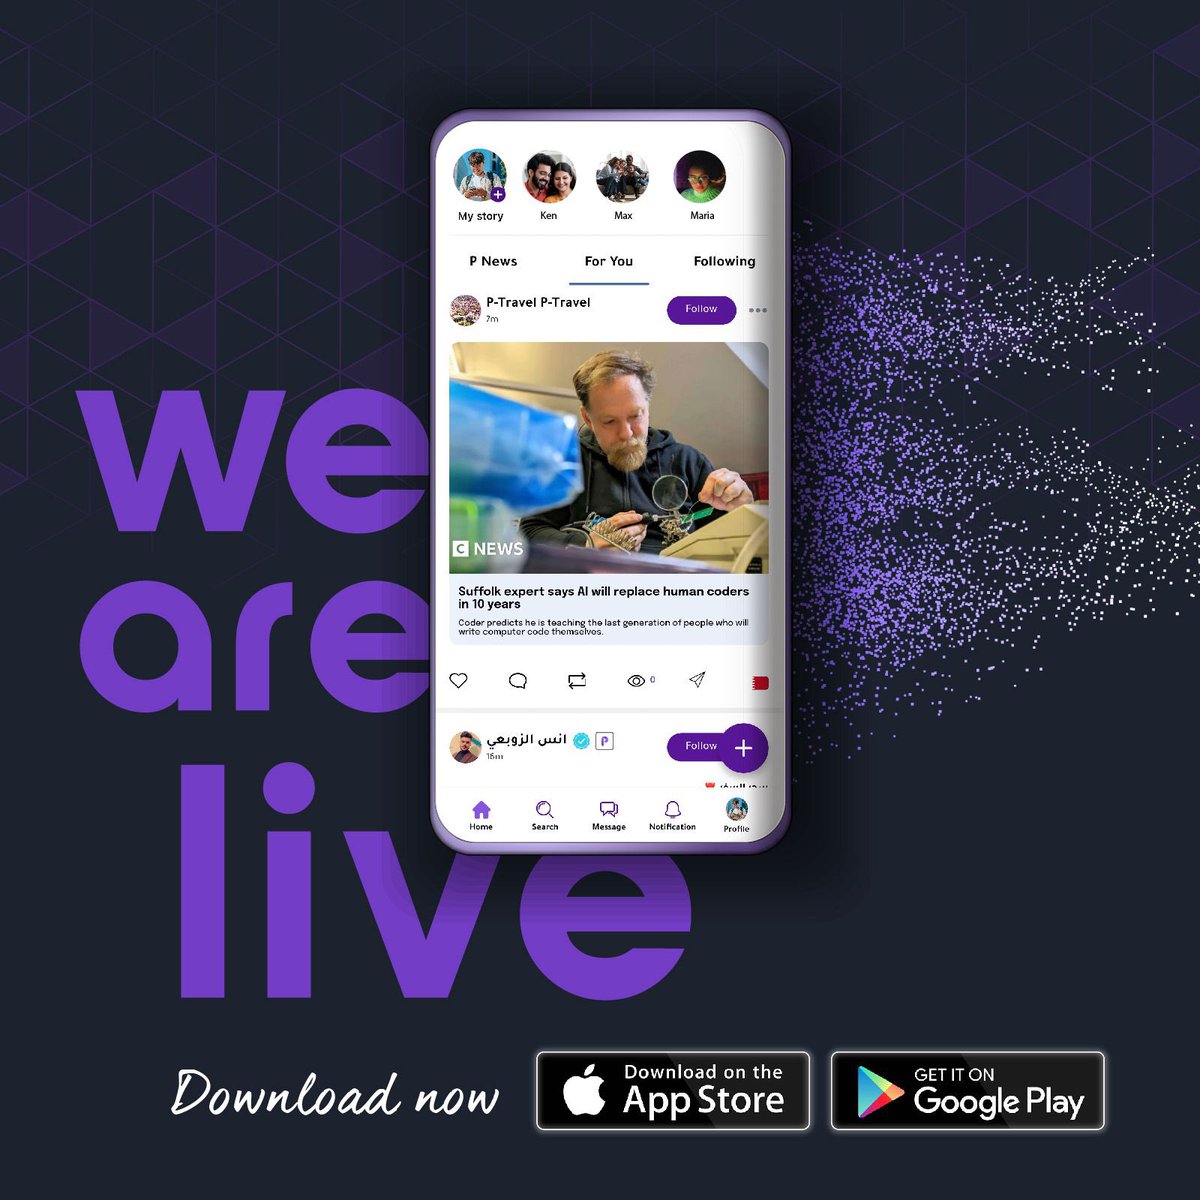 Chat, share content, and thrive within a specially designed dynamic community just for you. Join @Pangeanis now and explore the power of social interaction in a completely new way. App Store: apps.apple.com/us/app/pangean… Play Store: play.google.com/store/apps/det…